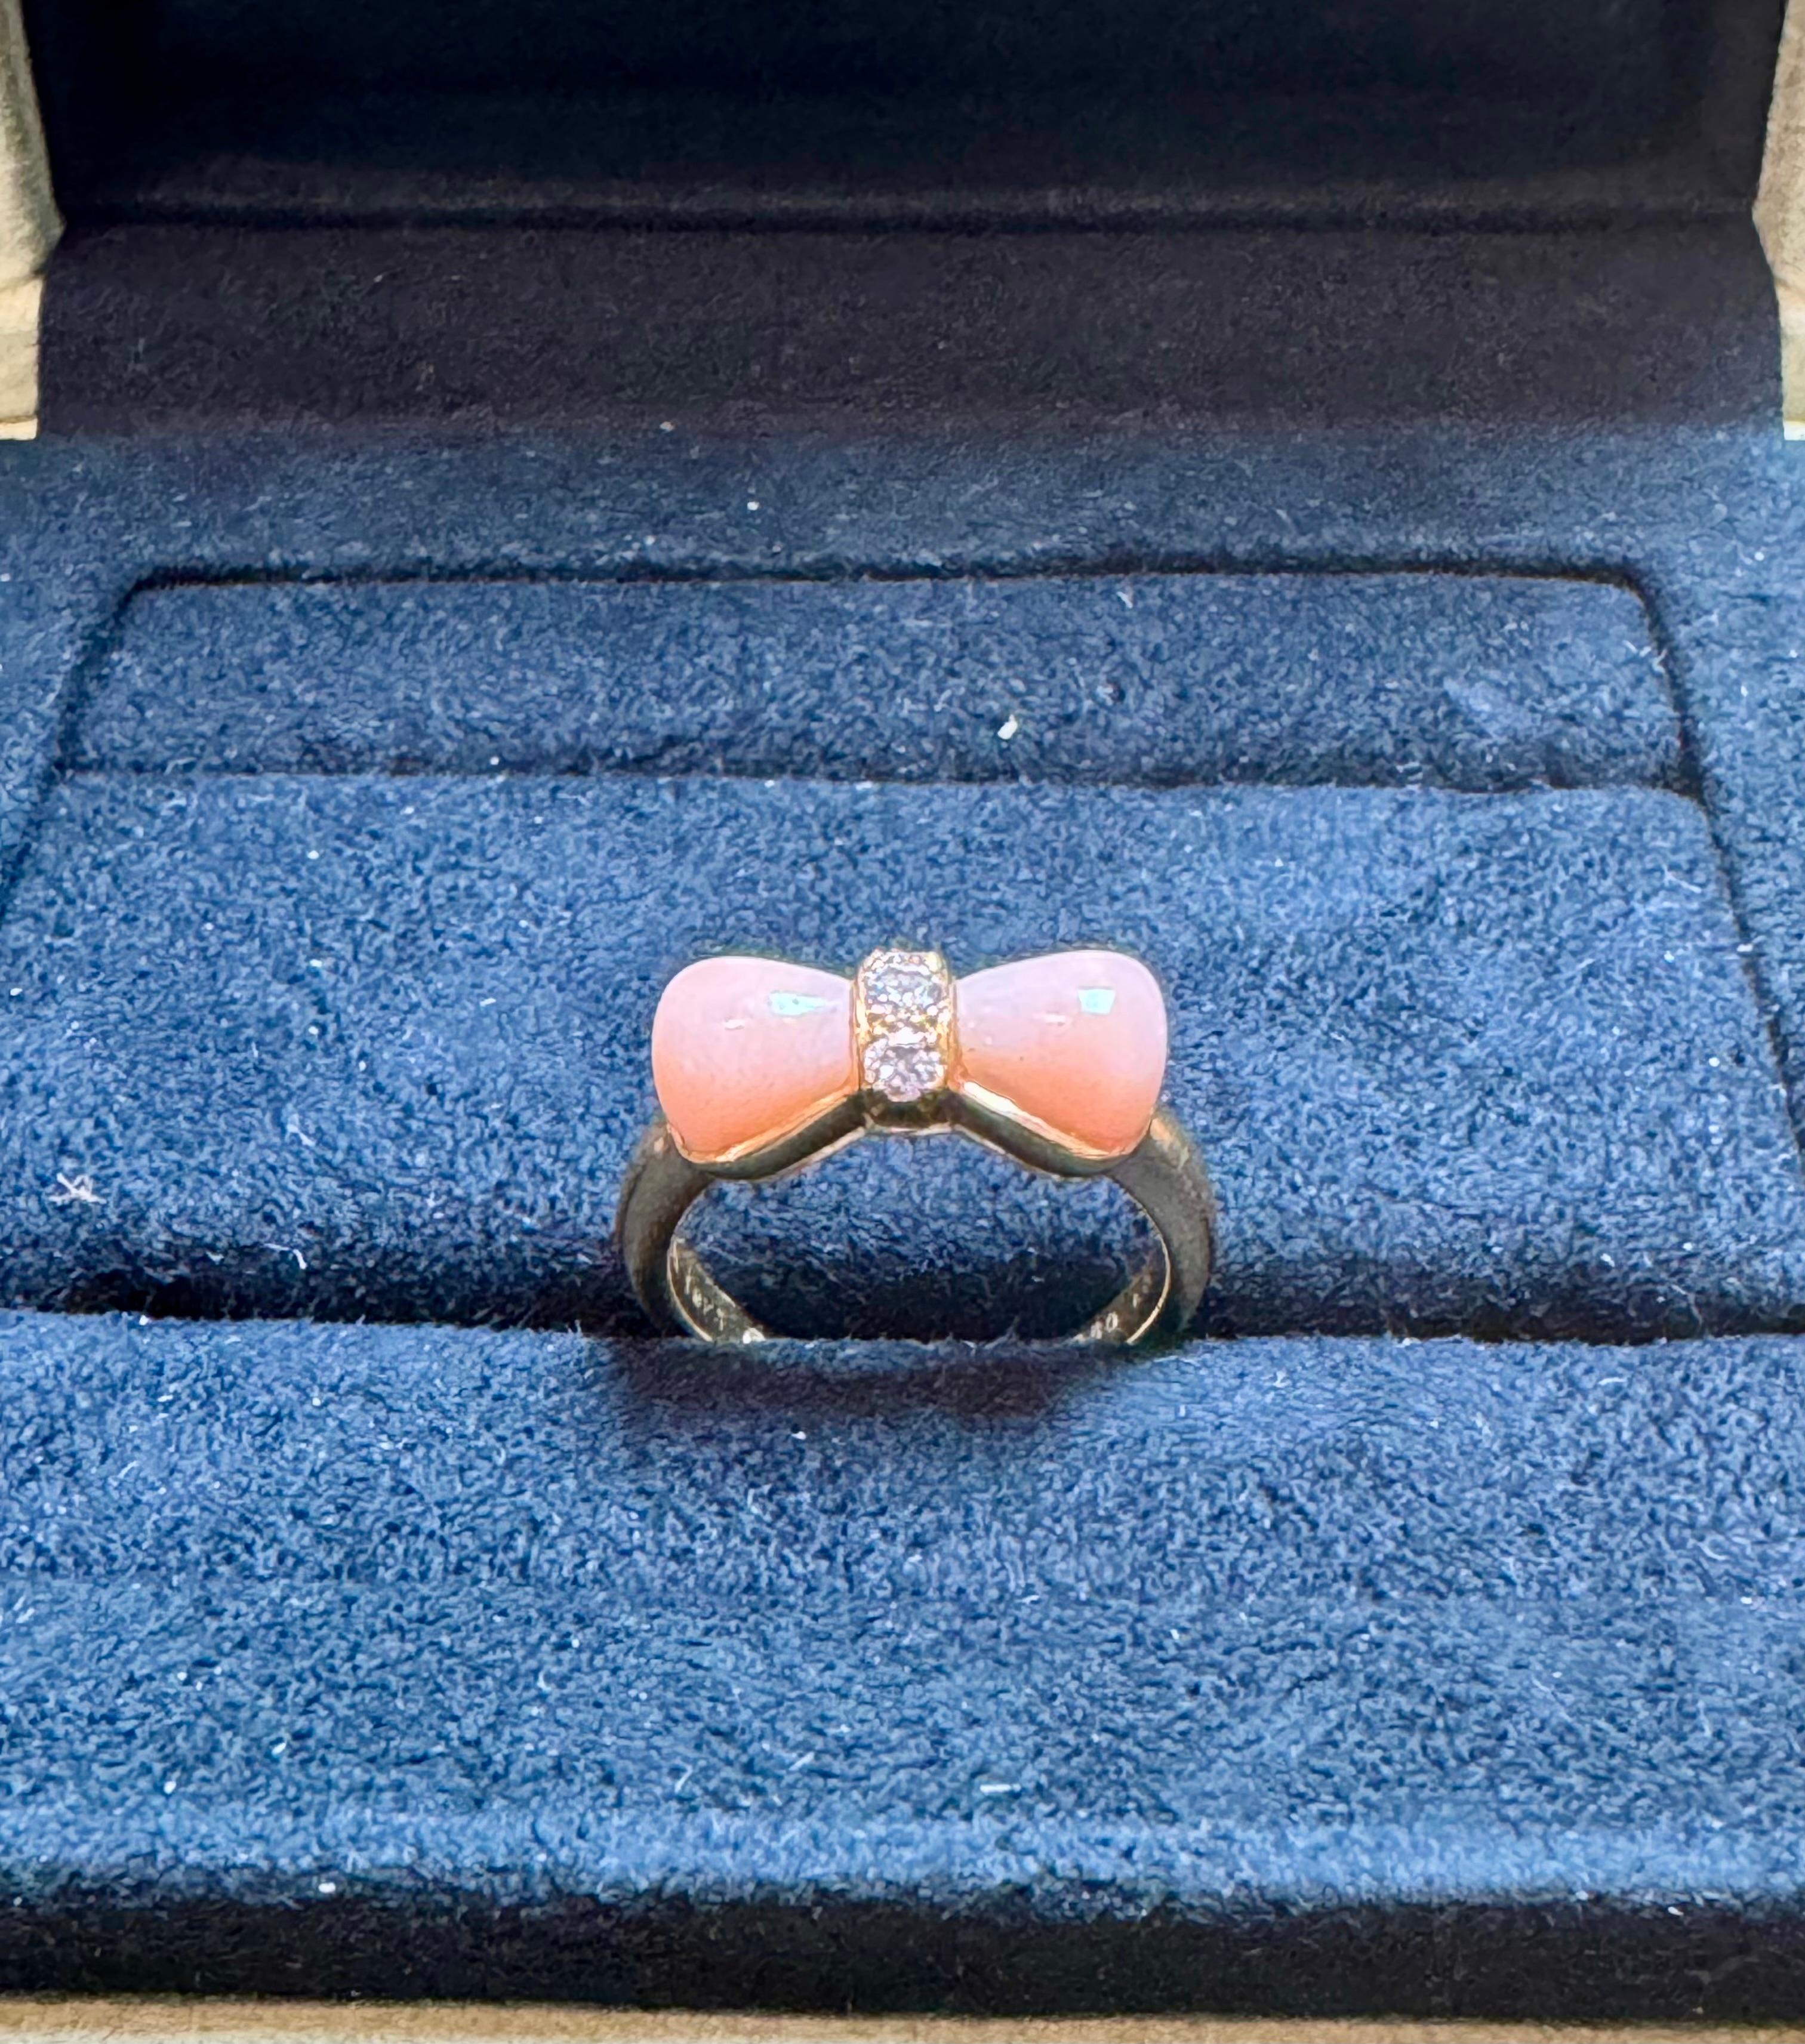 VAN CLEEF & ARPELS
A Van Cleef & Arpels Coral Bow and Diamond Ring made in 18 Karat Yellow Gold. The total weight of the ring is 4.5 grams. 
The ring size is US 4.5
This lovely authentic ring is crafted from 18k yellow gold with a polished finish.